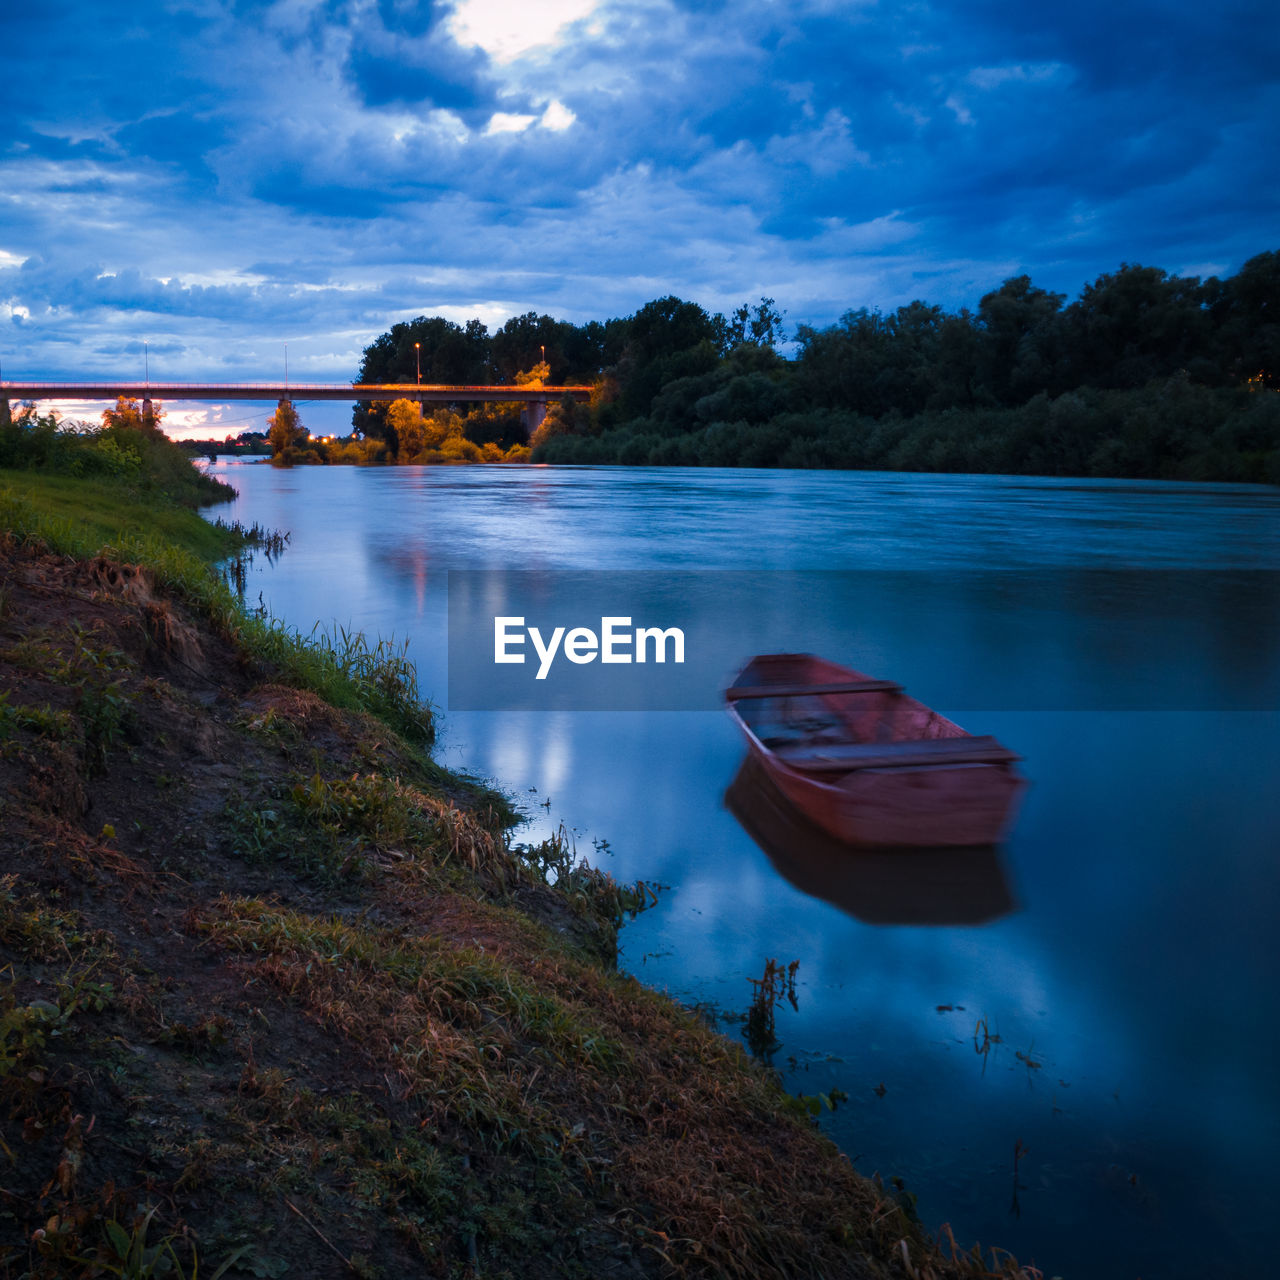 Landscape with moored boat in sava river during overcast evening at blue hour 